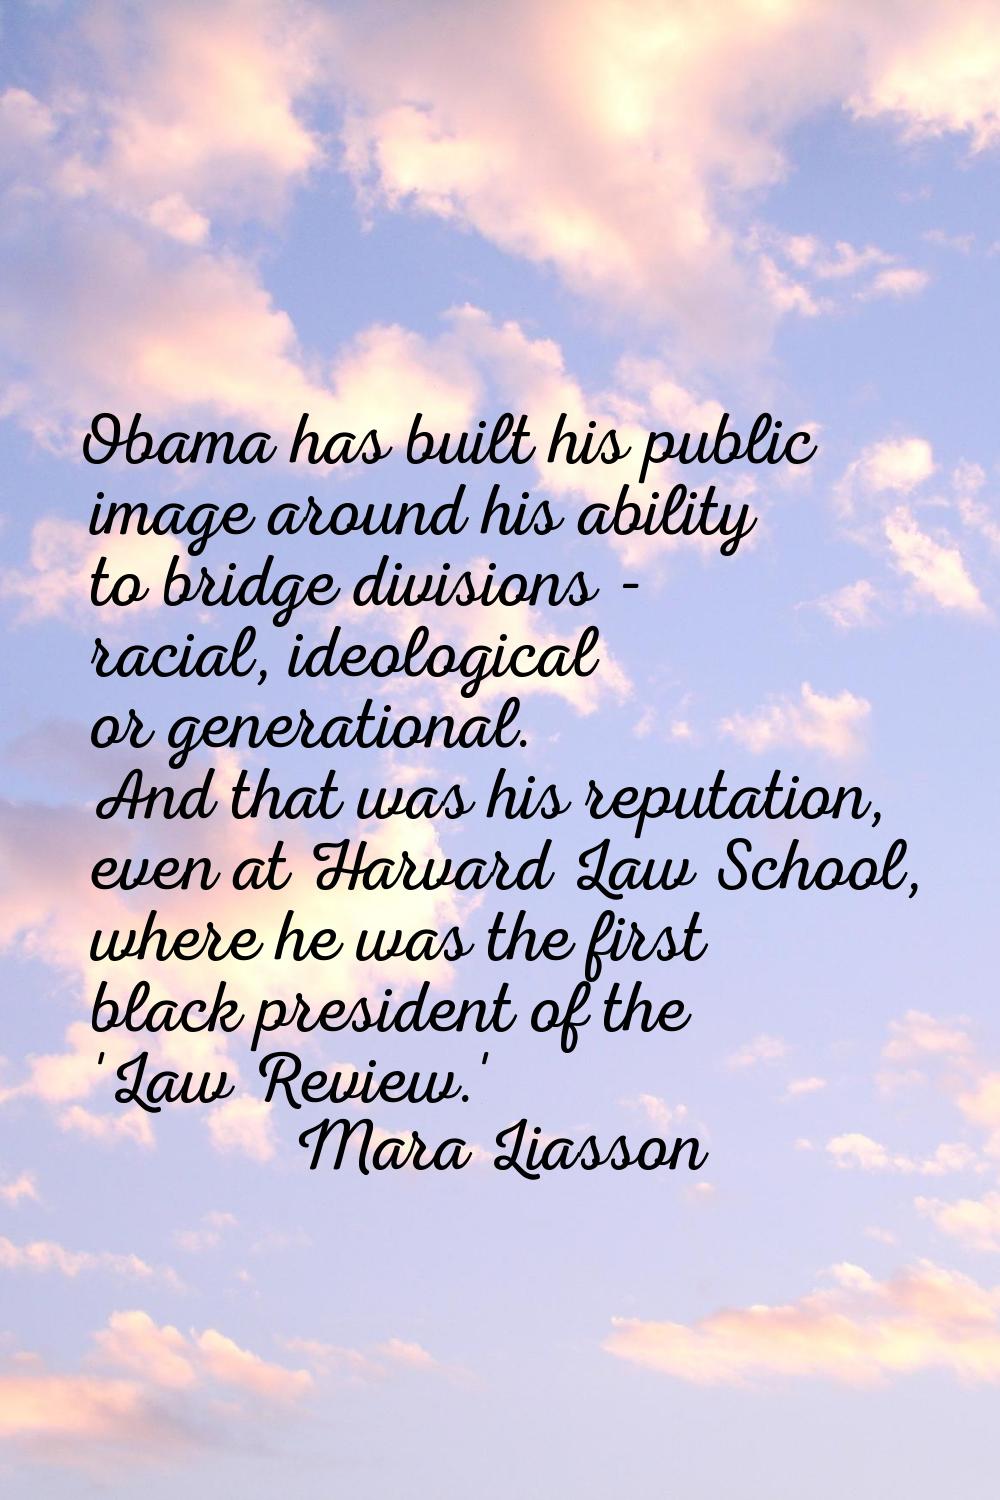 Obama has built his public image around his ability to bridge divisions - racial, ideological or ge